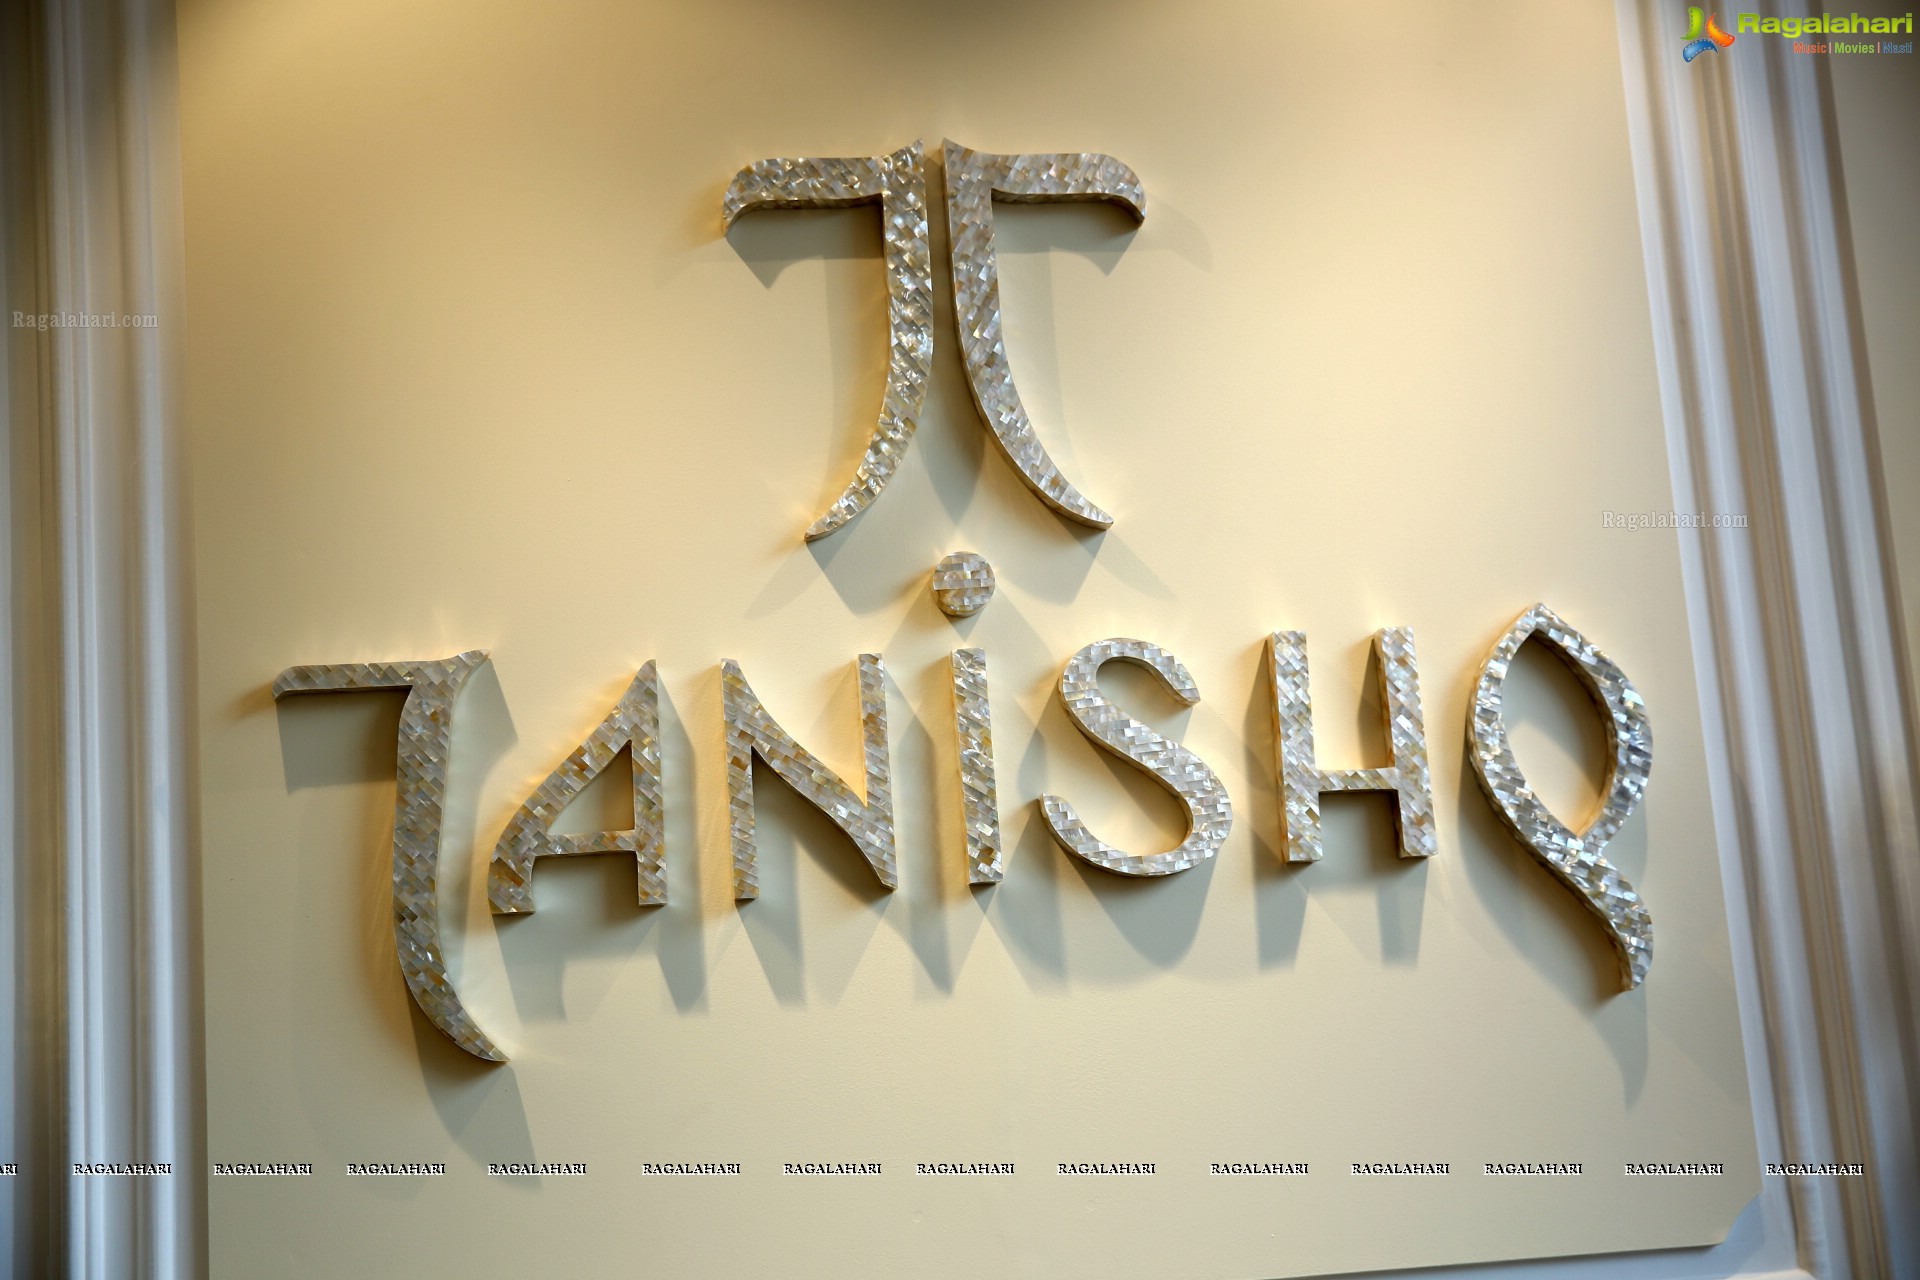 Tanishq Jewellery Launches Their New Store at Begumpet